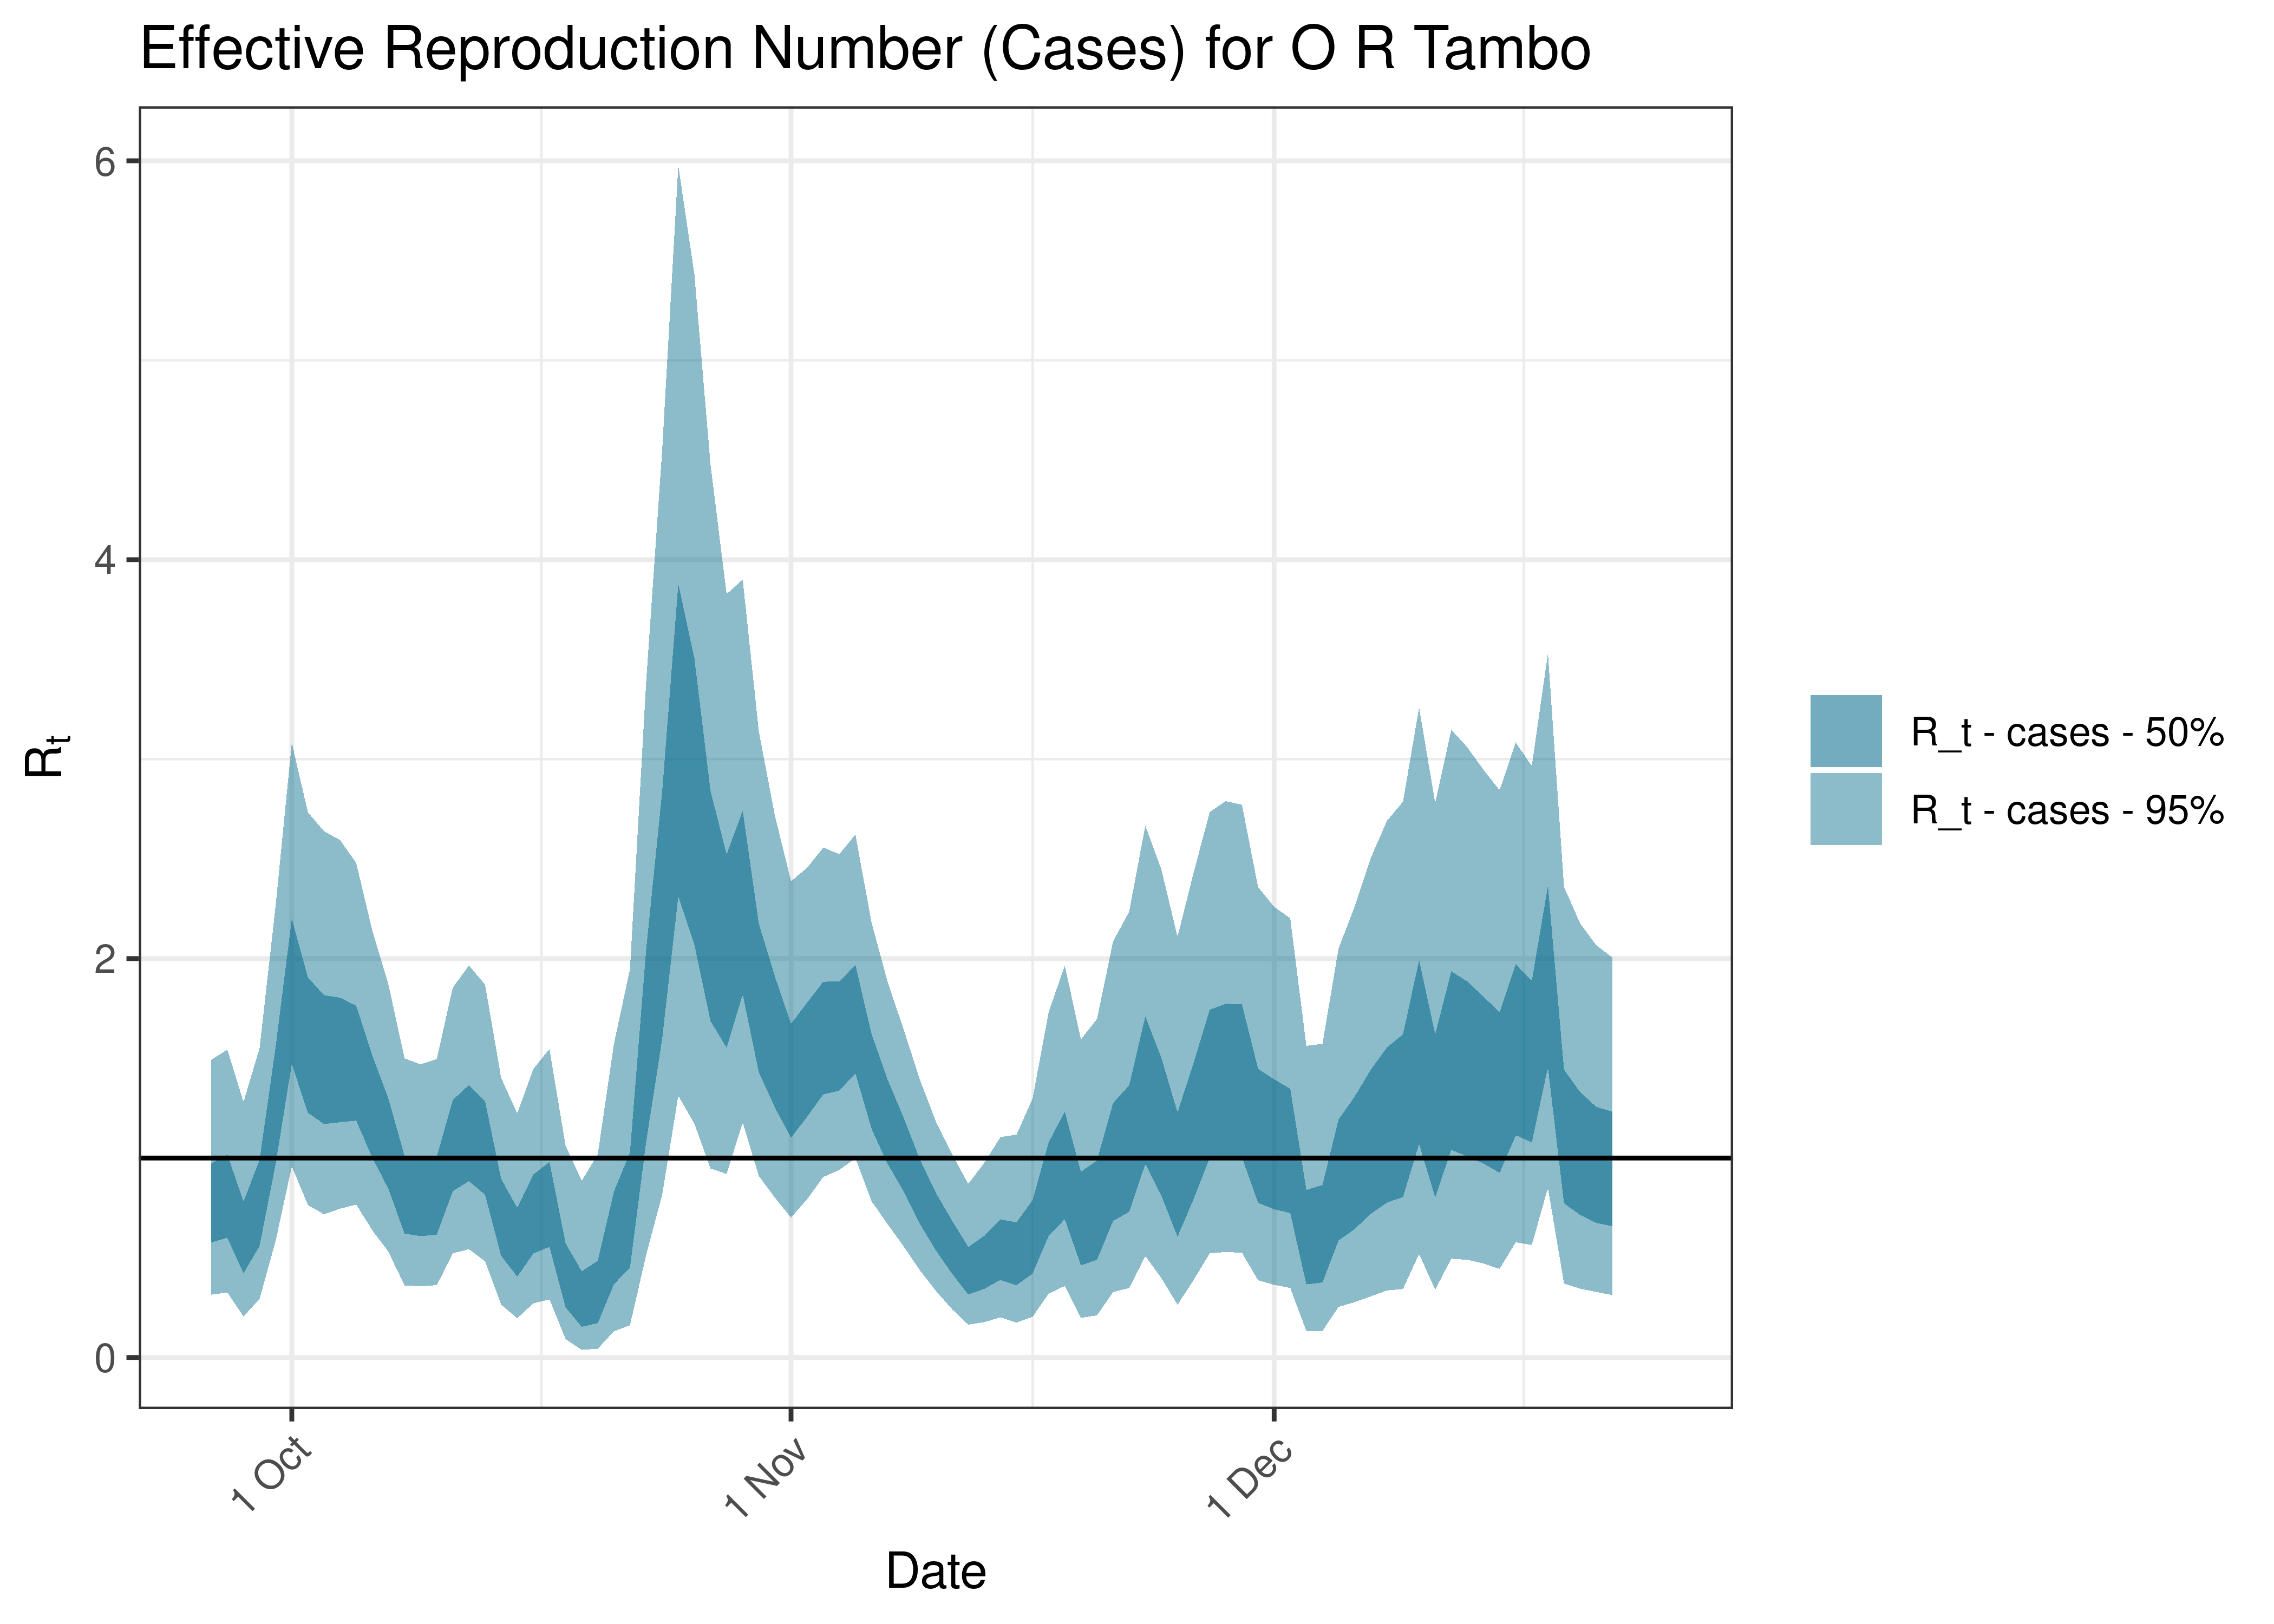 Estimated Effective Reproduction Number Based on Cases for O R Tambo over last 90 days